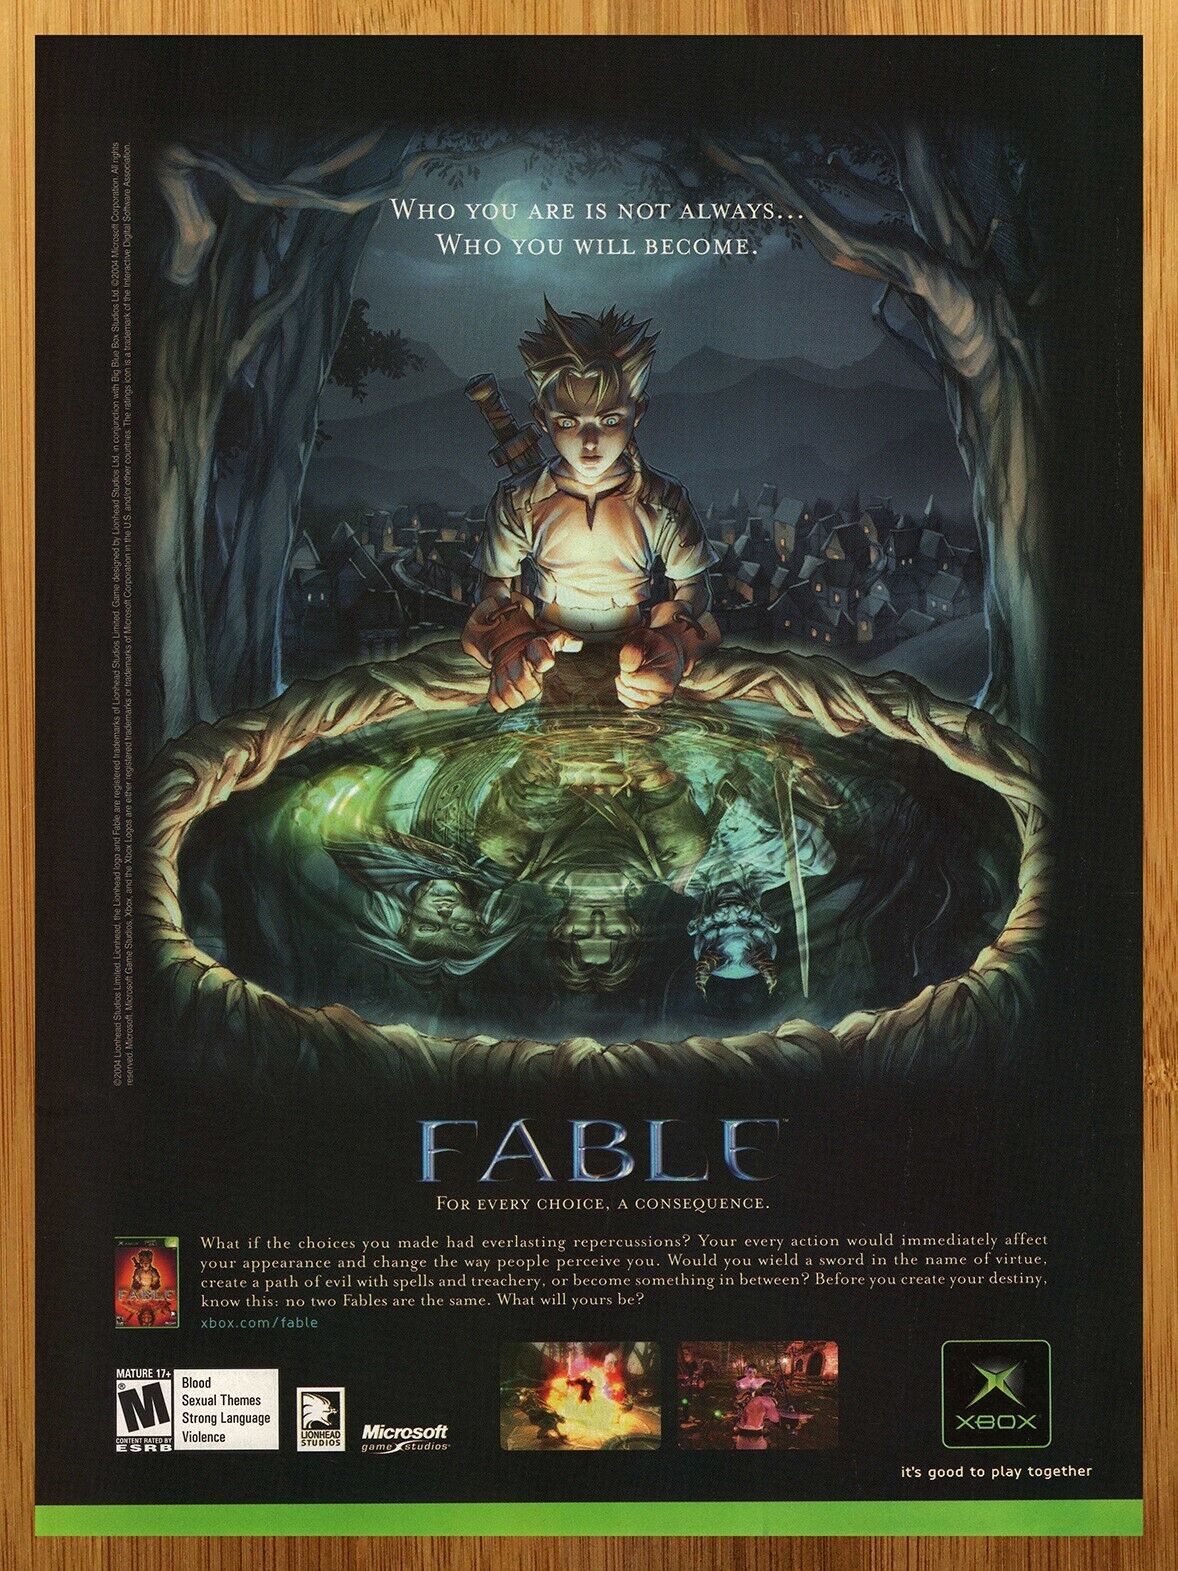 2004 Fable Xbox Vintage Print Ad/Poster Authentic Official Video Game Promo Art